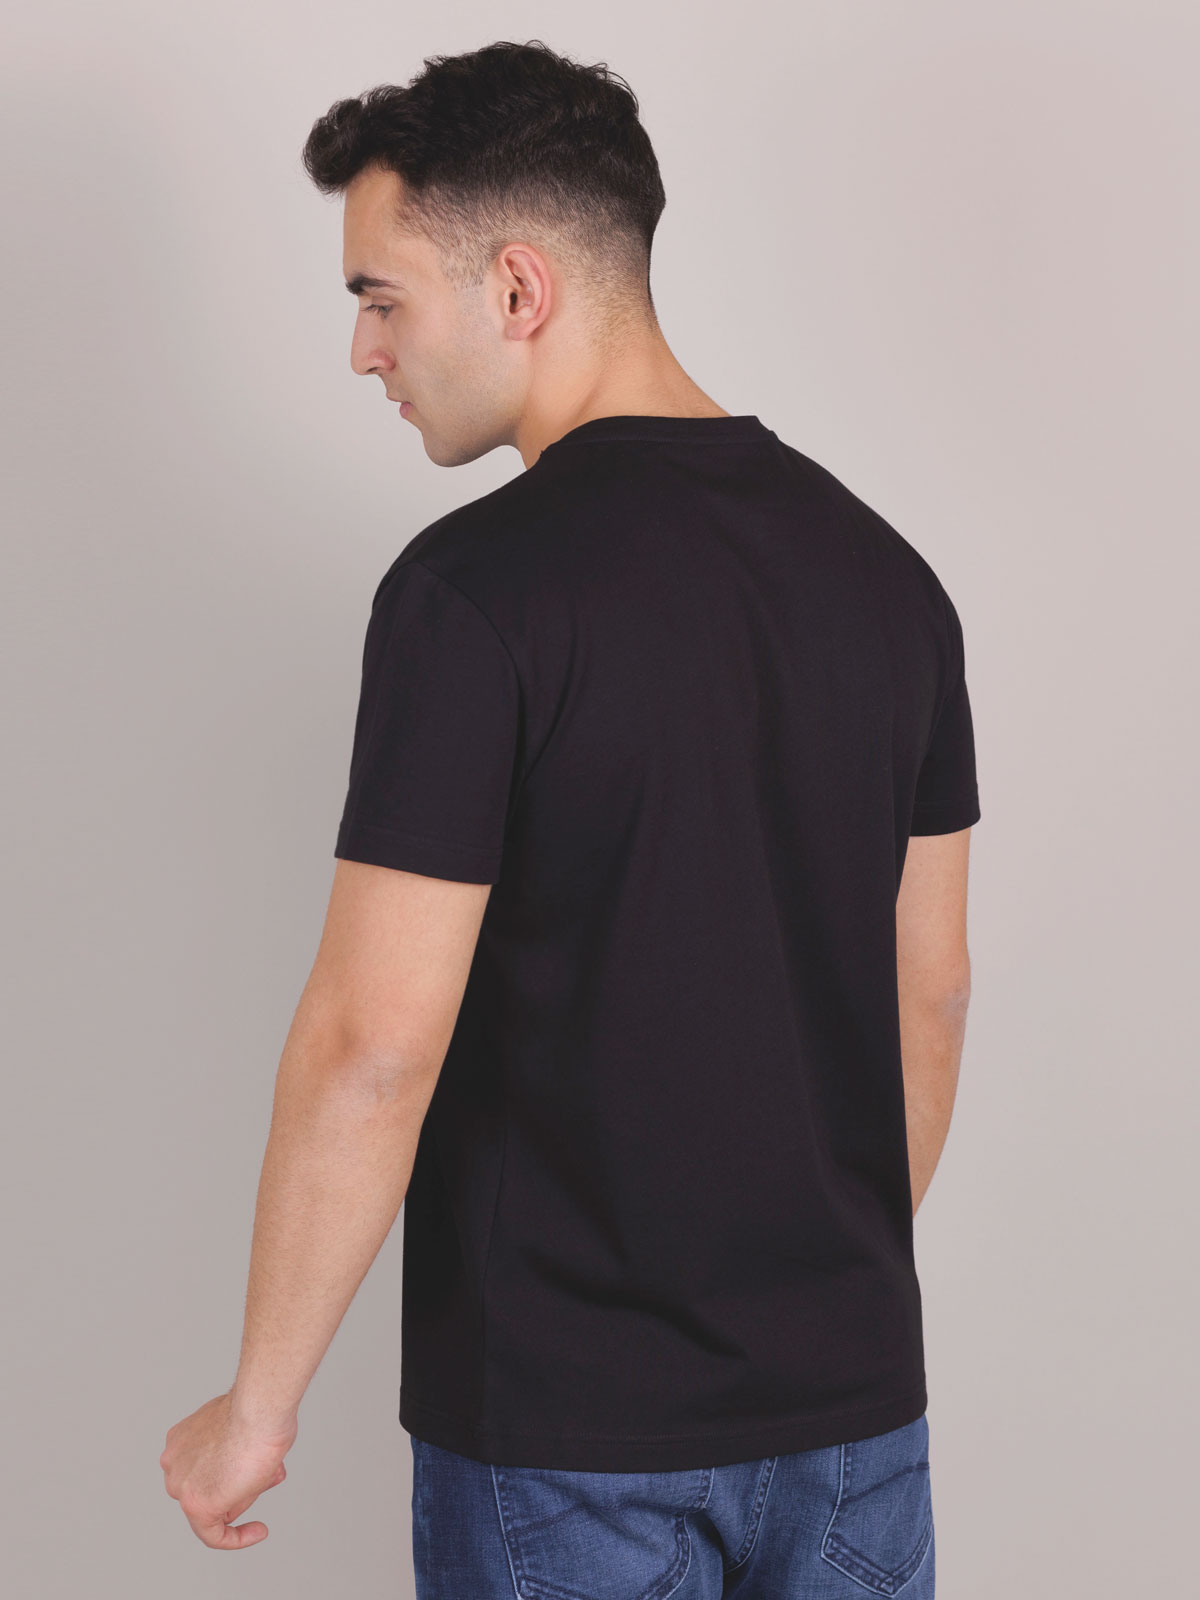 Tshirt in black with a spectacular prin - 96459 € 23.62 img2